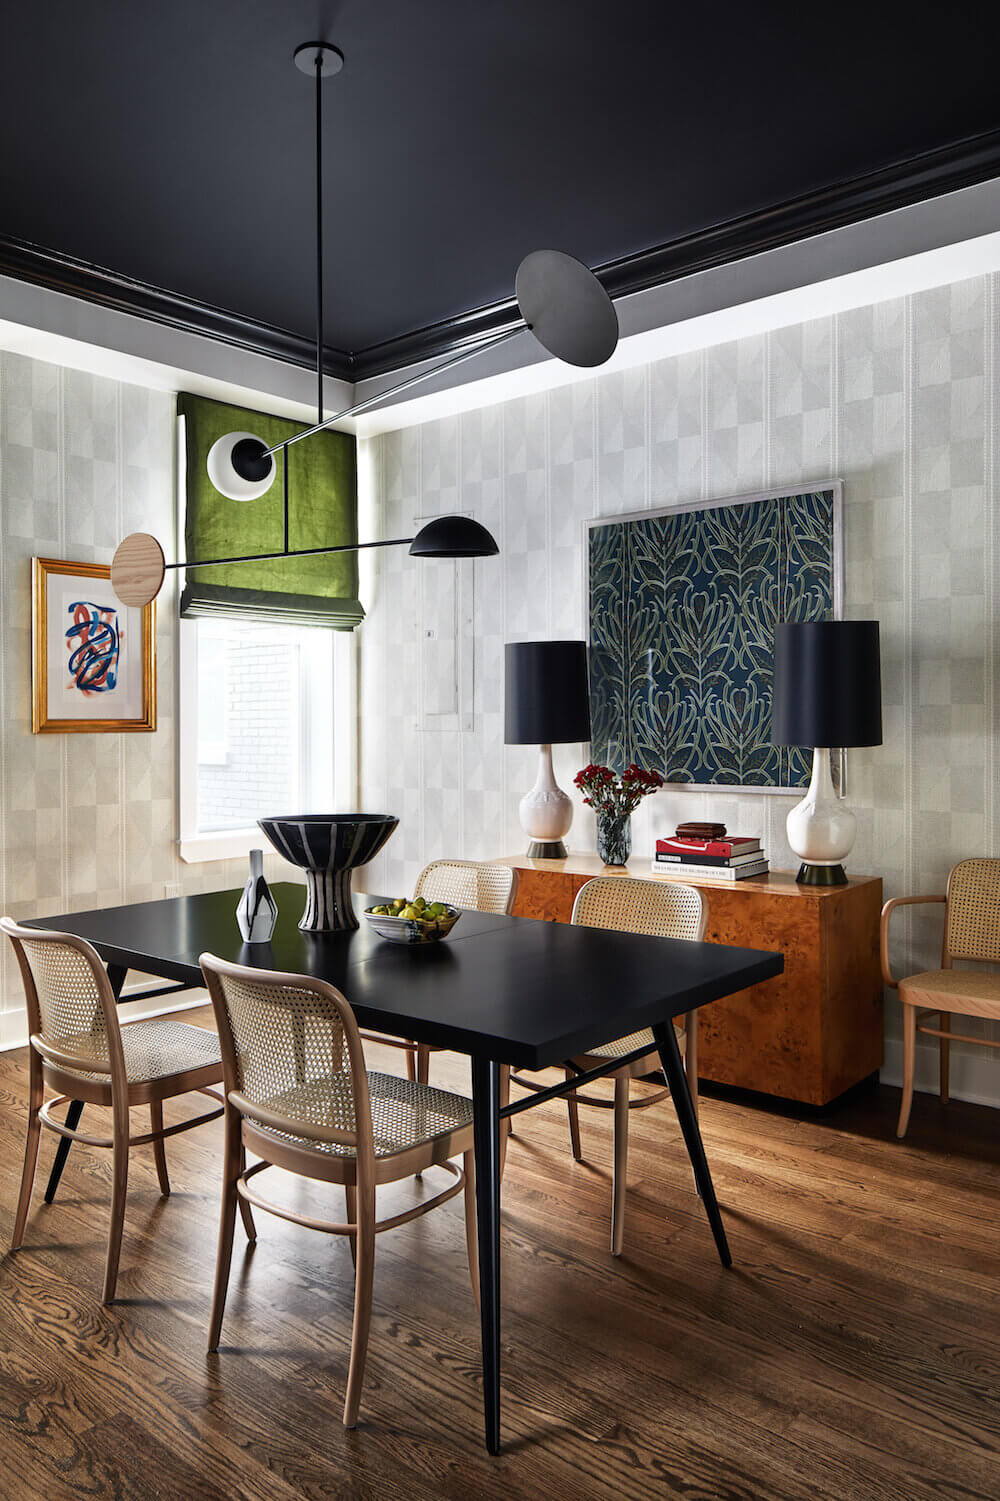 AnEclecticTownhousewithColorTouches TheNordroom6 An Eclectic Washington Townhouse with Colorful Touches